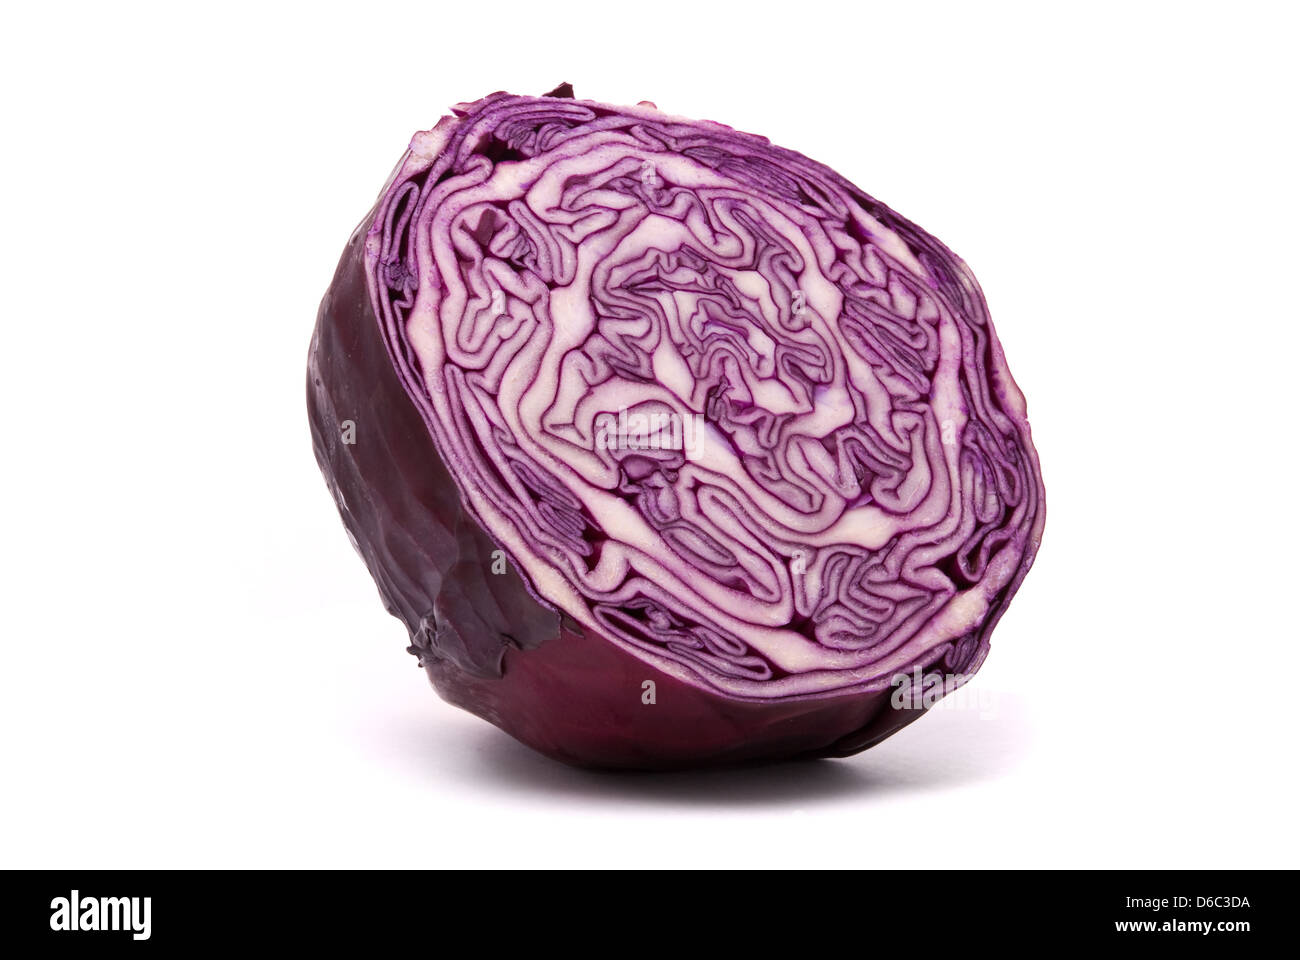 Red cabbage on a white background Stock Photo